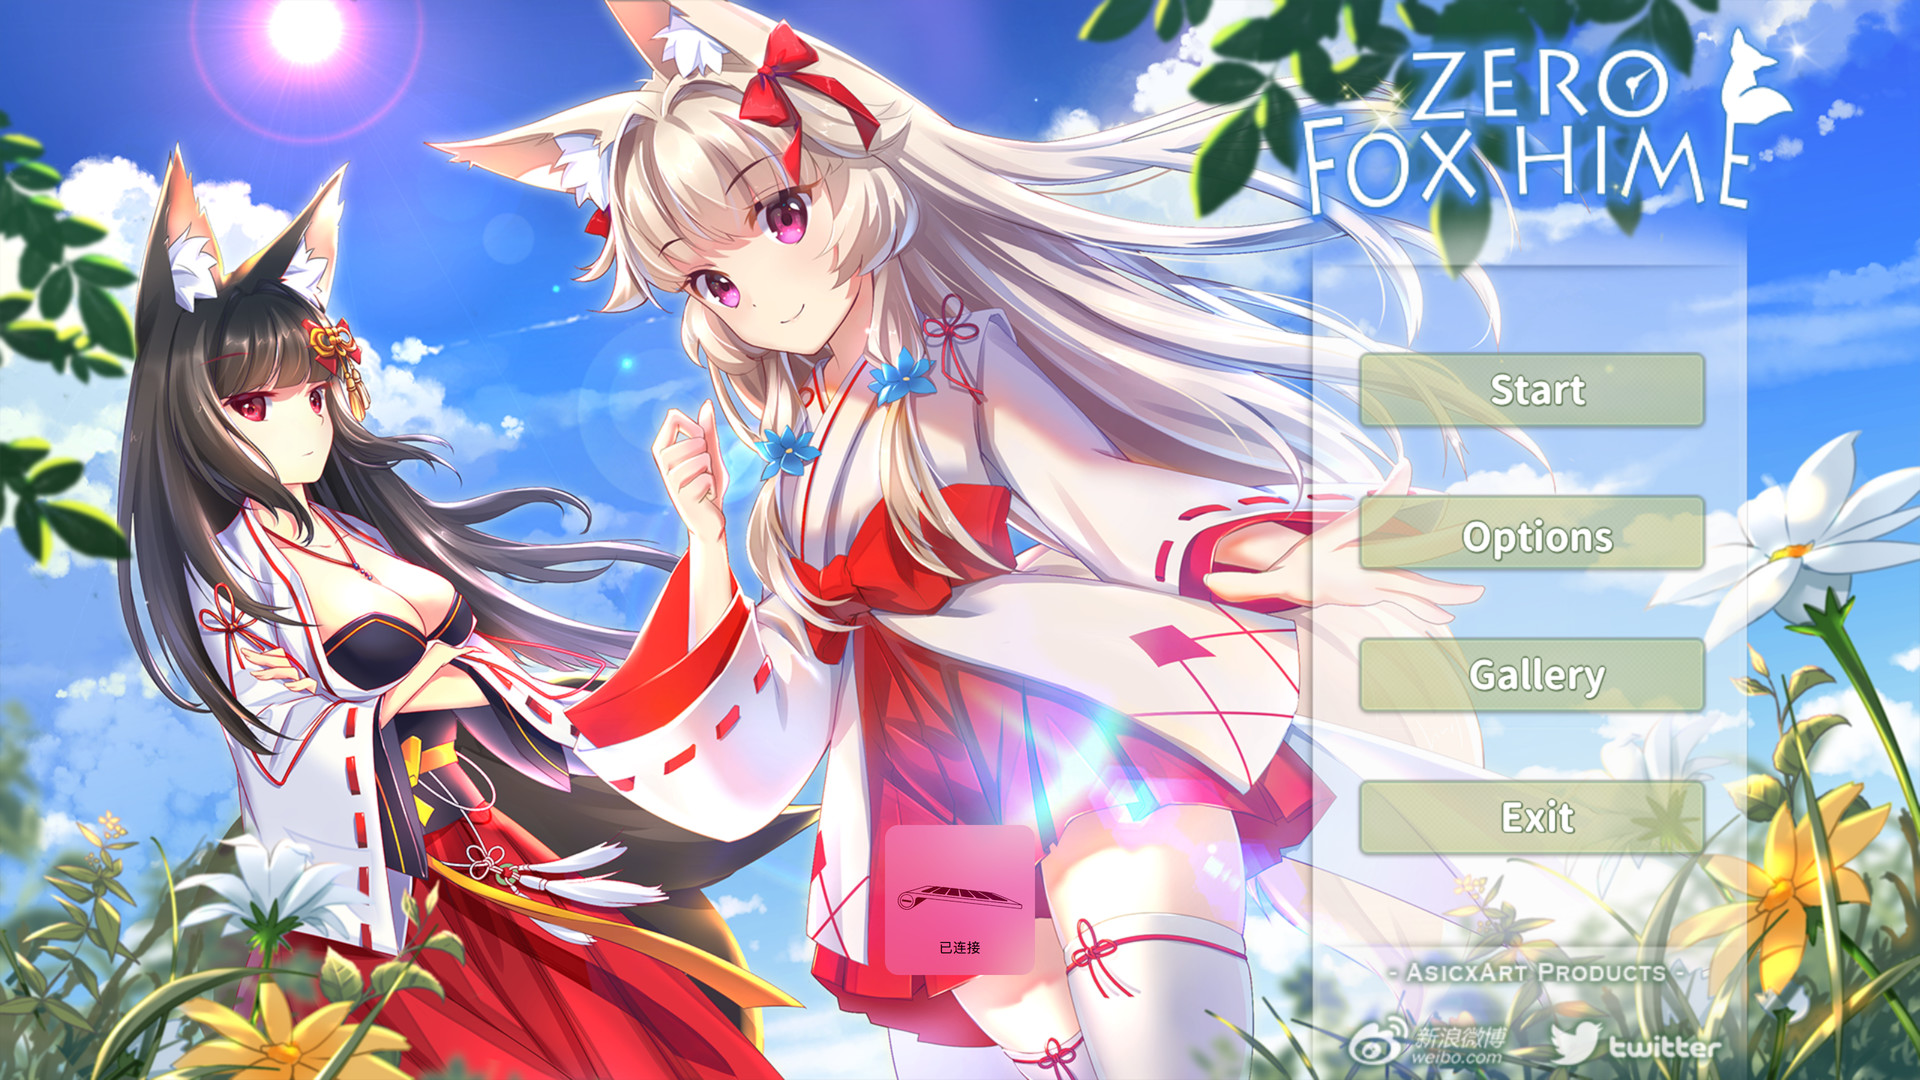 Find the best laptops for Fox Hime Zero